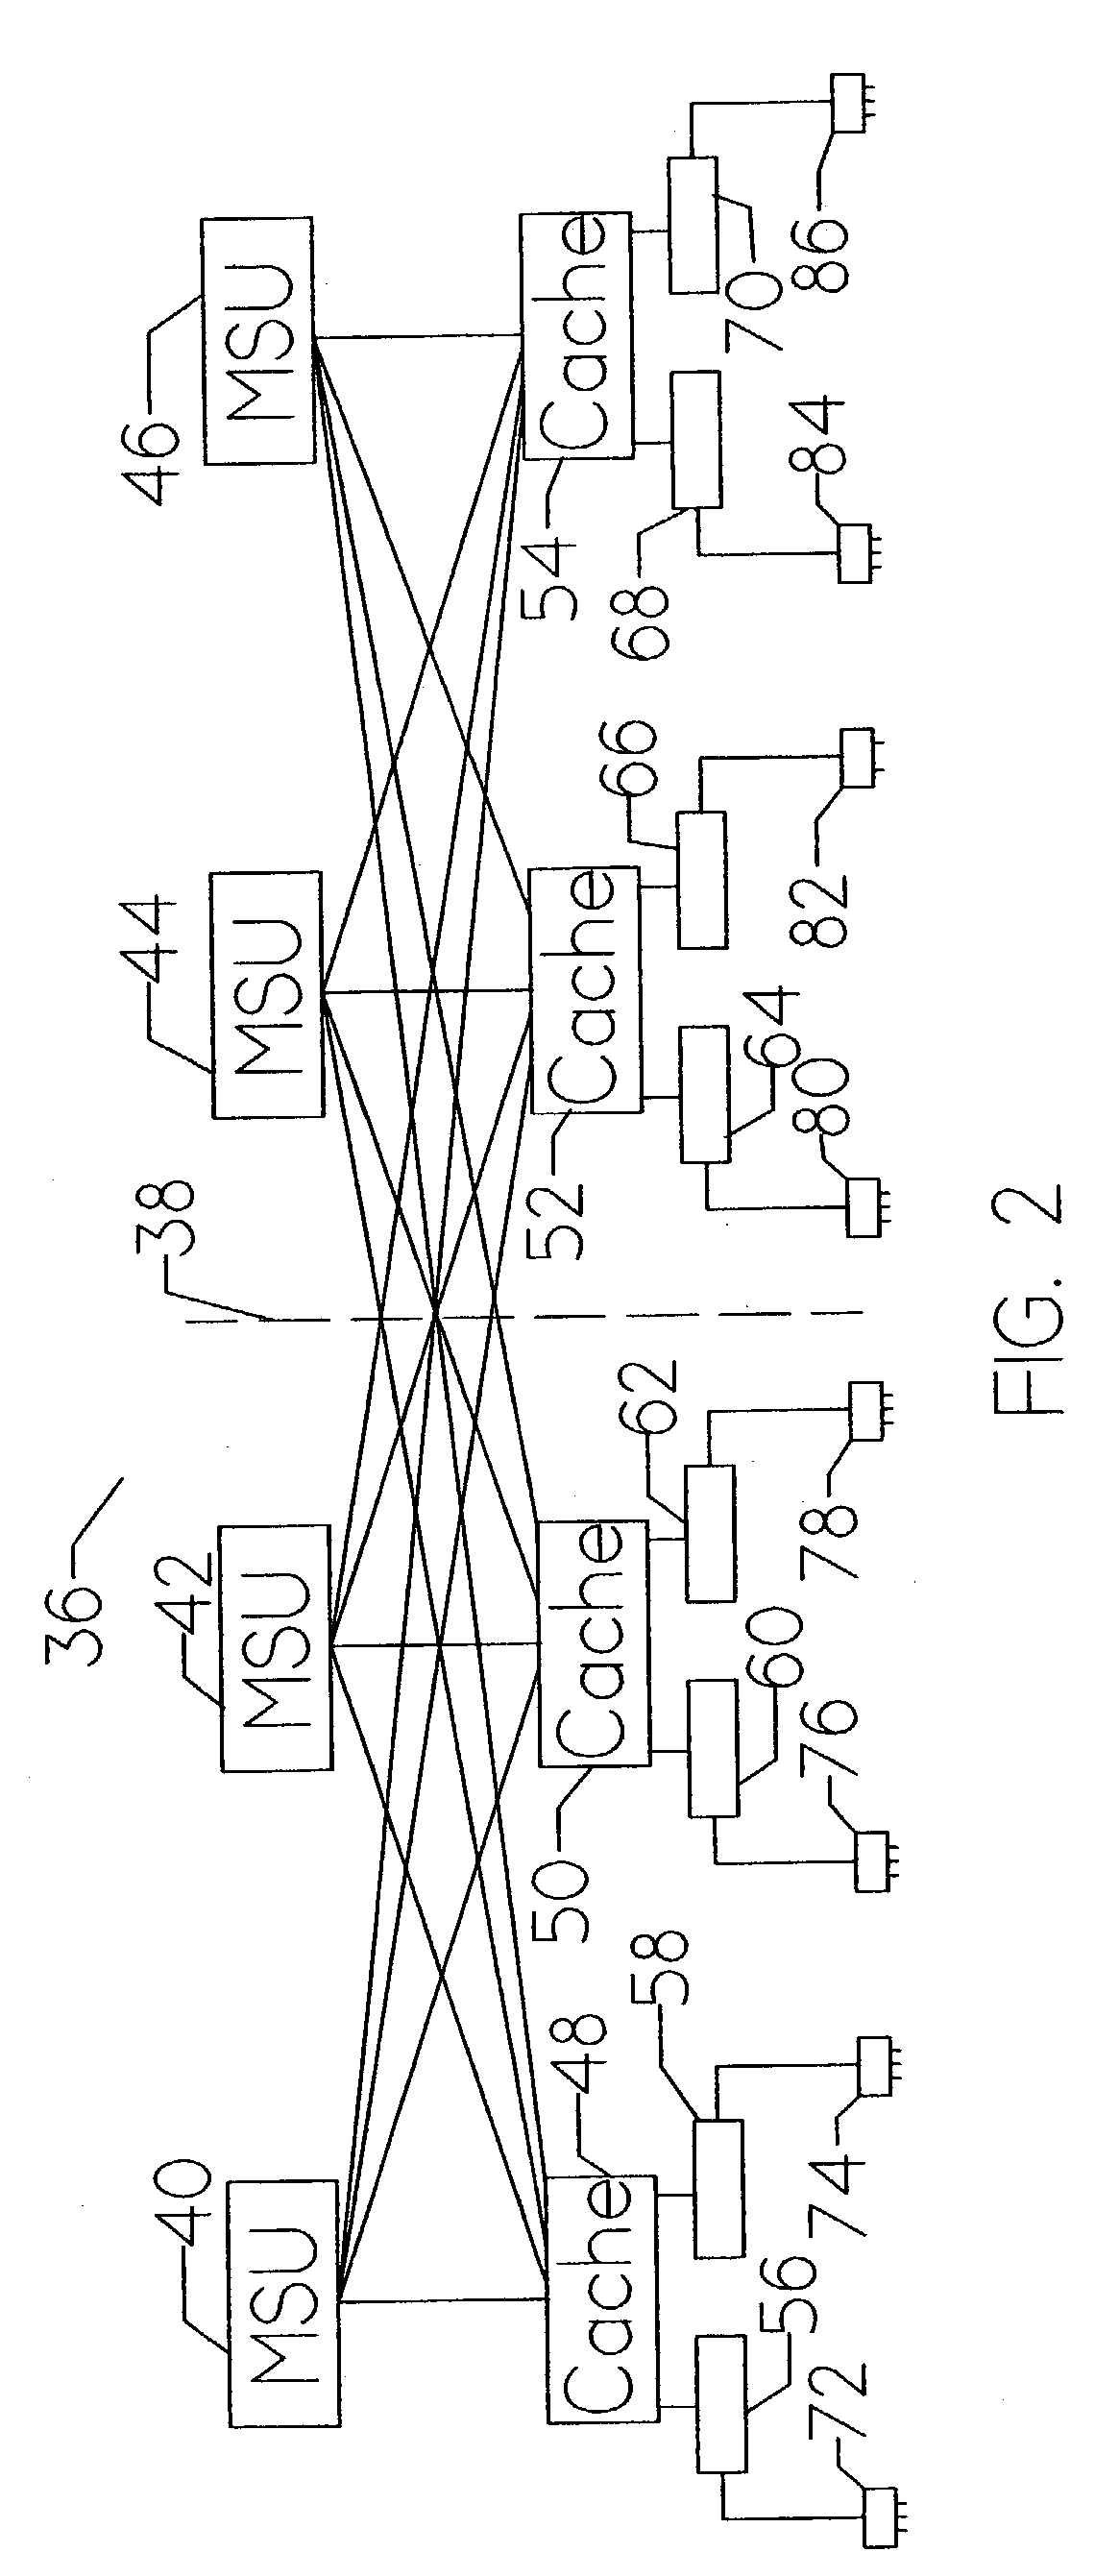 Method for shortening the resynchronization time following failure in a computer system utilizing separate servers for redundancy